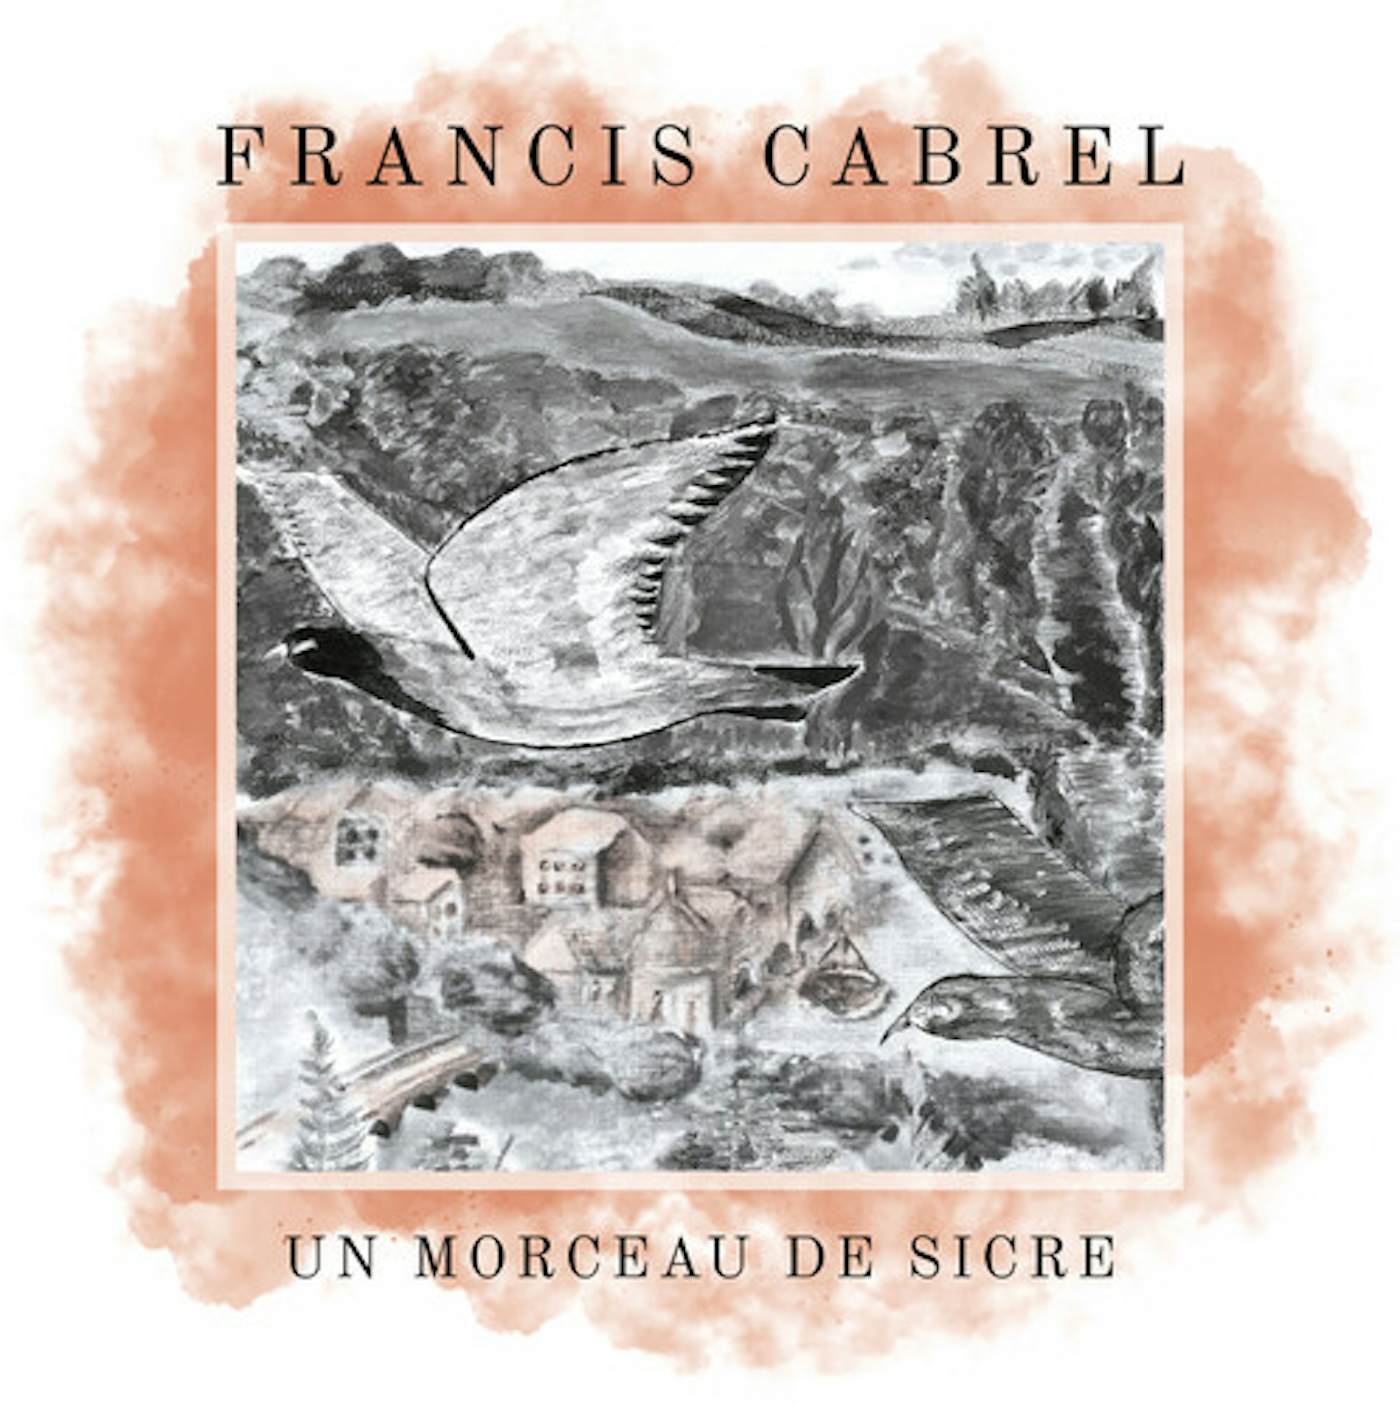 Tickets for Francis Cabrel in New York